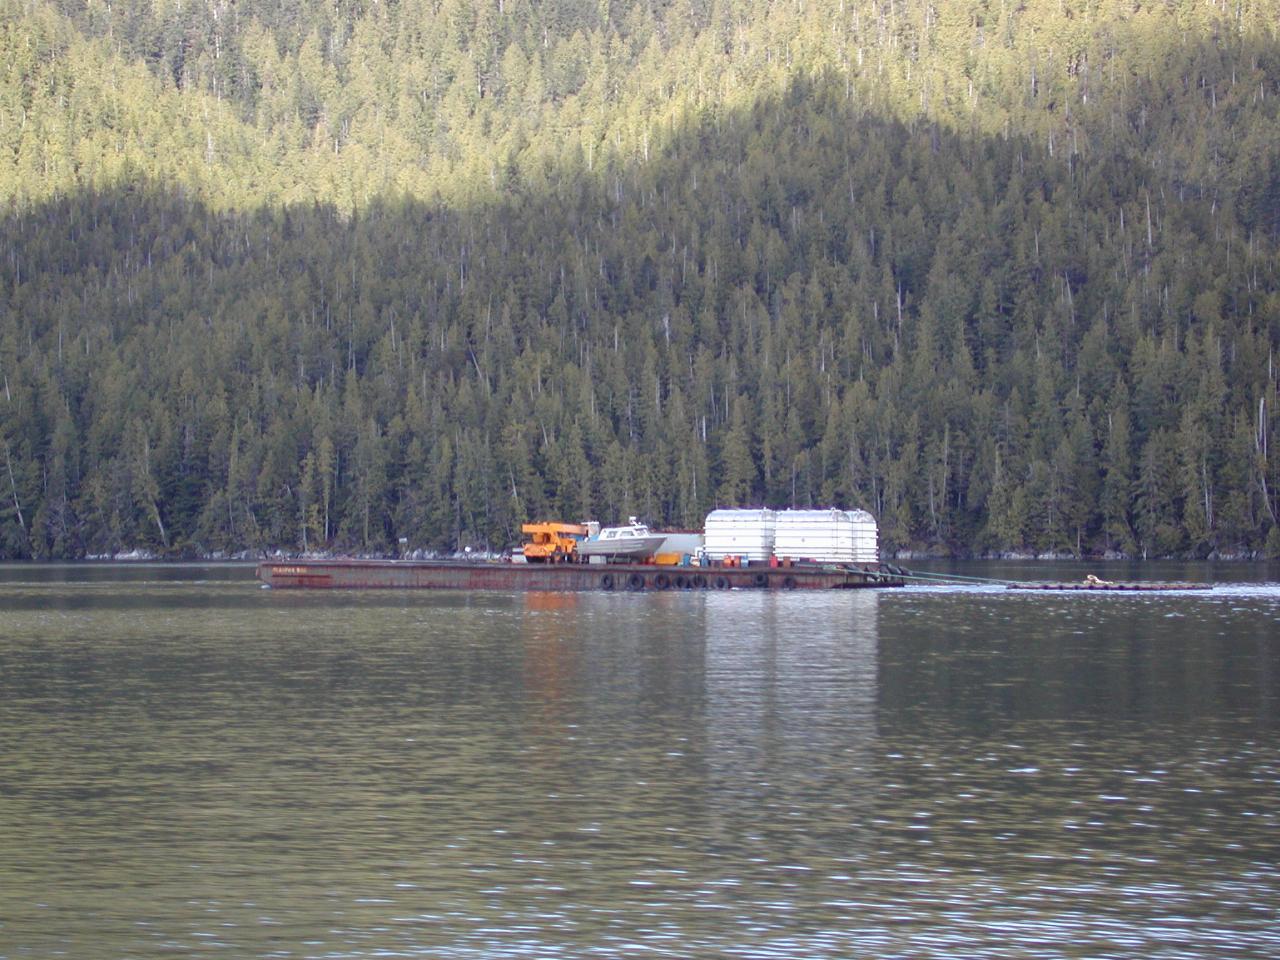 Taking tools for the job - passing a barge south of Gribble Island, BC